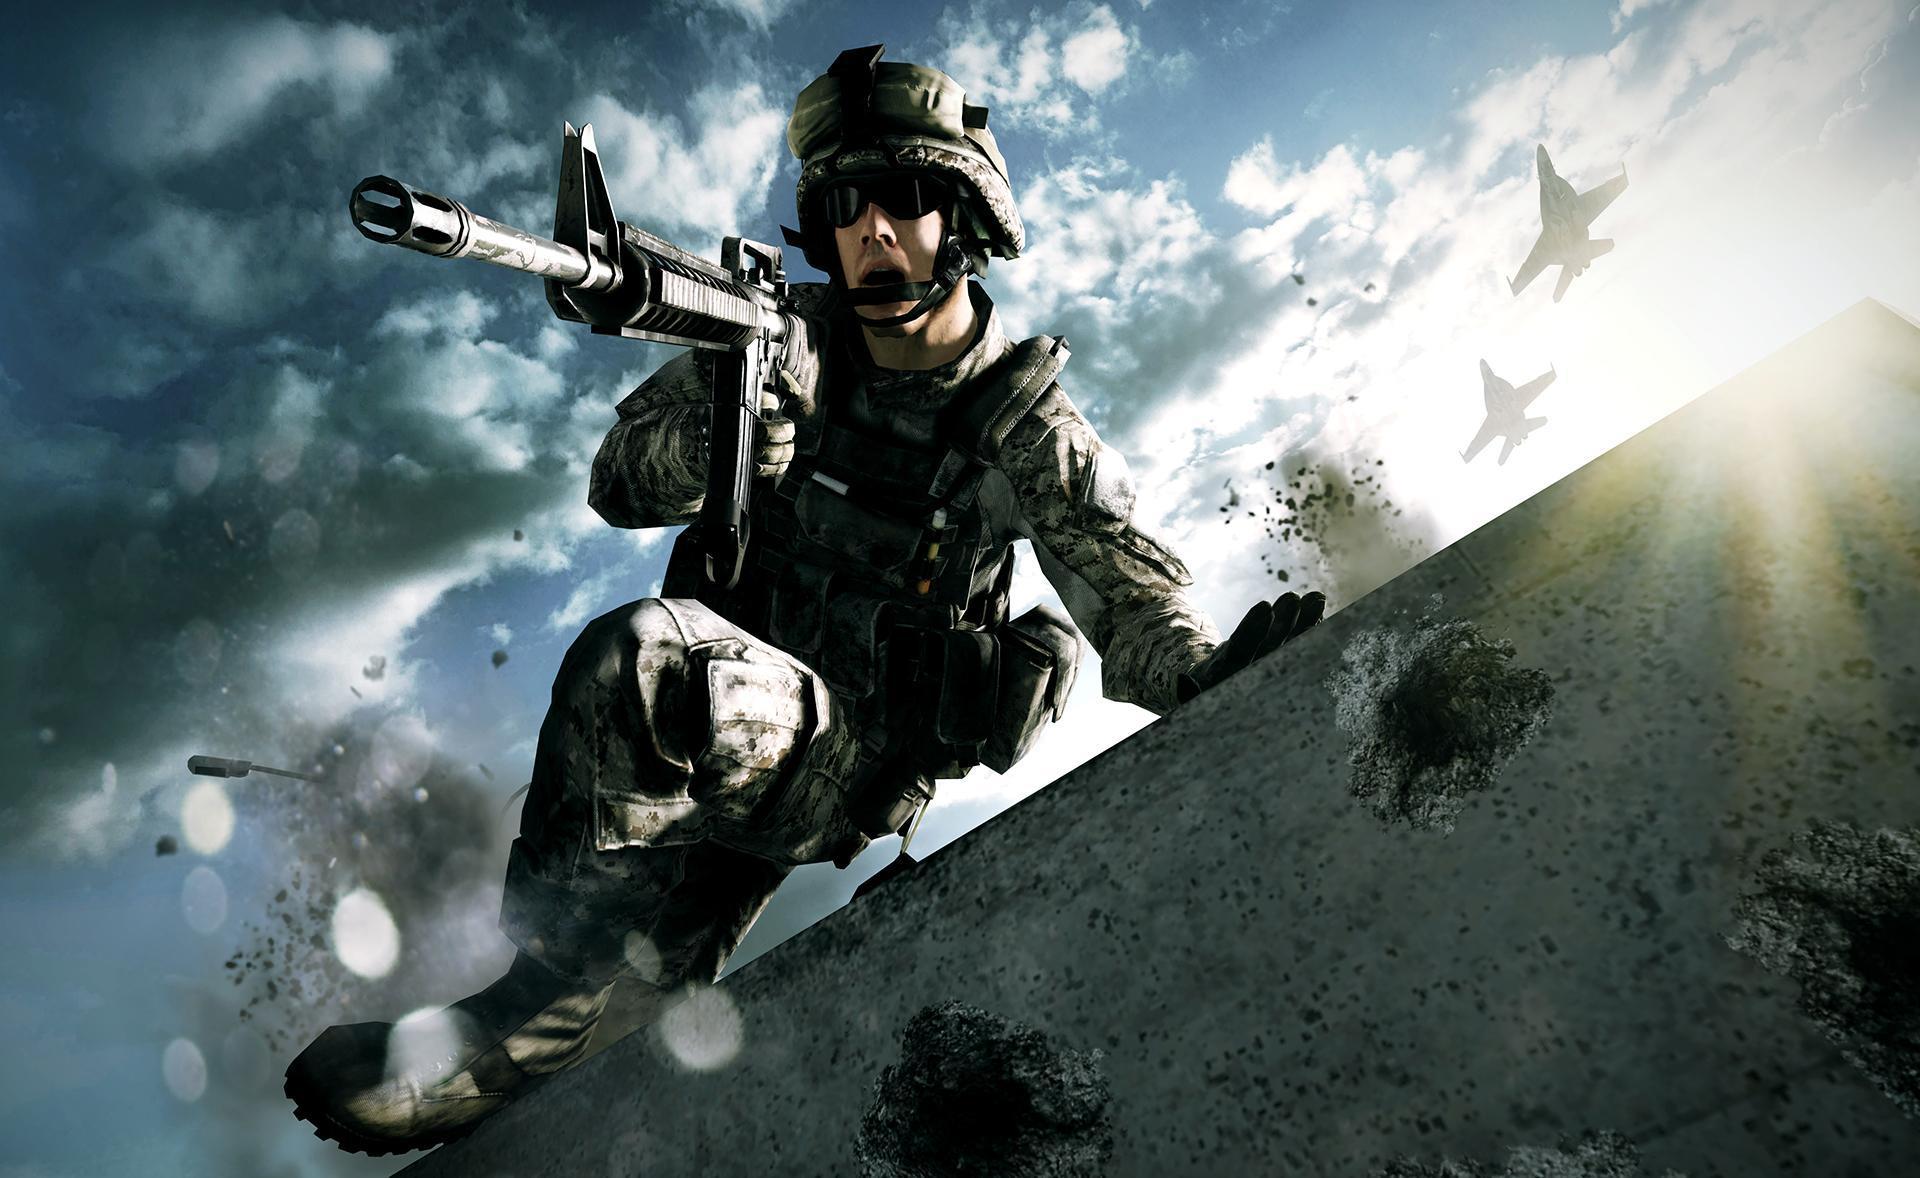 Cool Army Anction Android Wallpapers 7681 Wallpapers